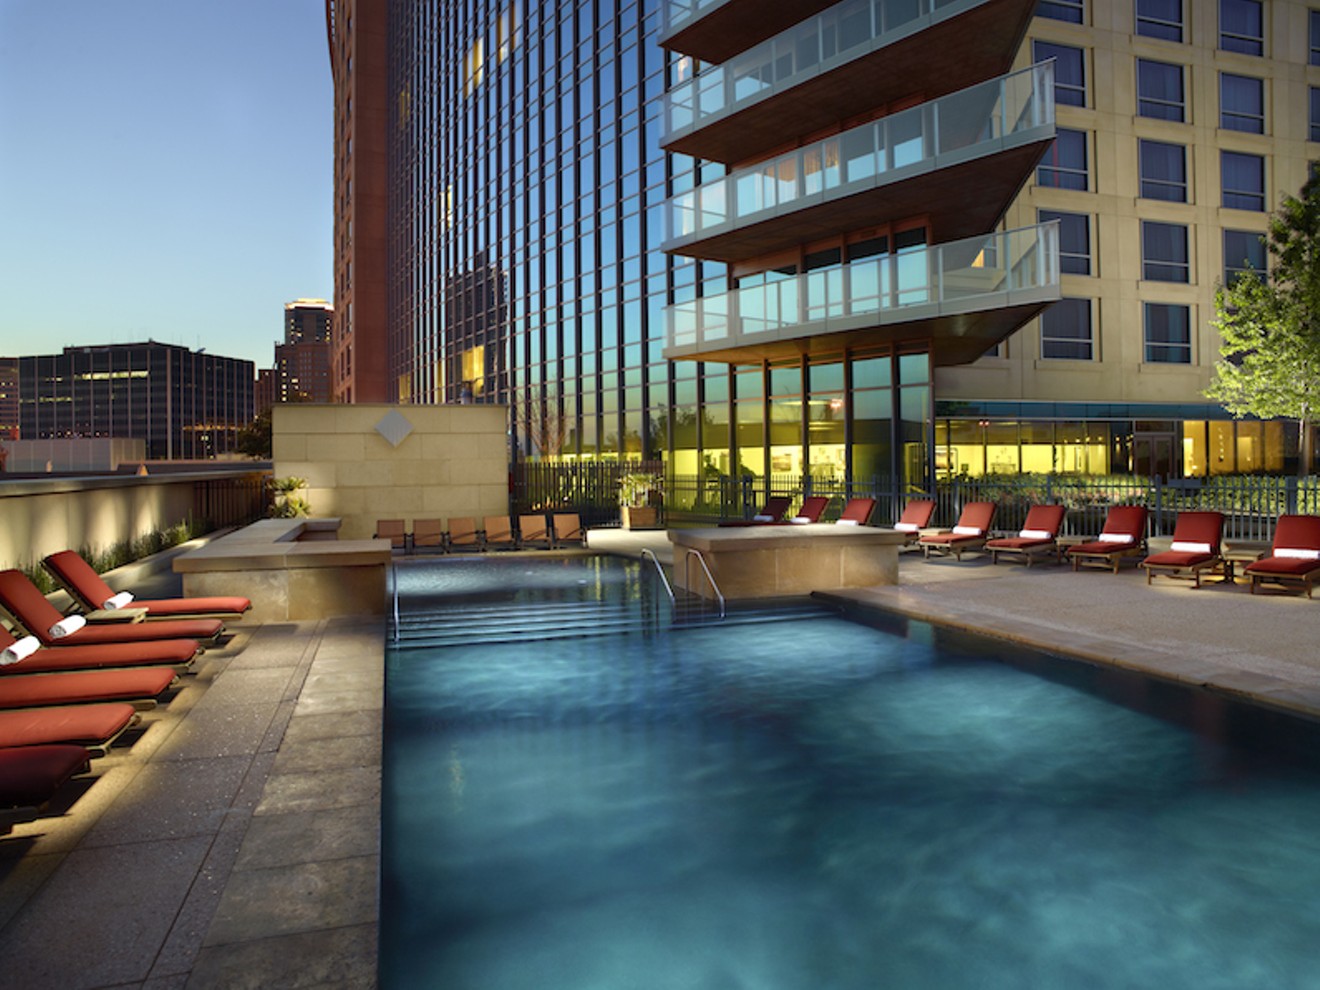 The Omni Fort Worth is conveniently located in the heart of downtown.